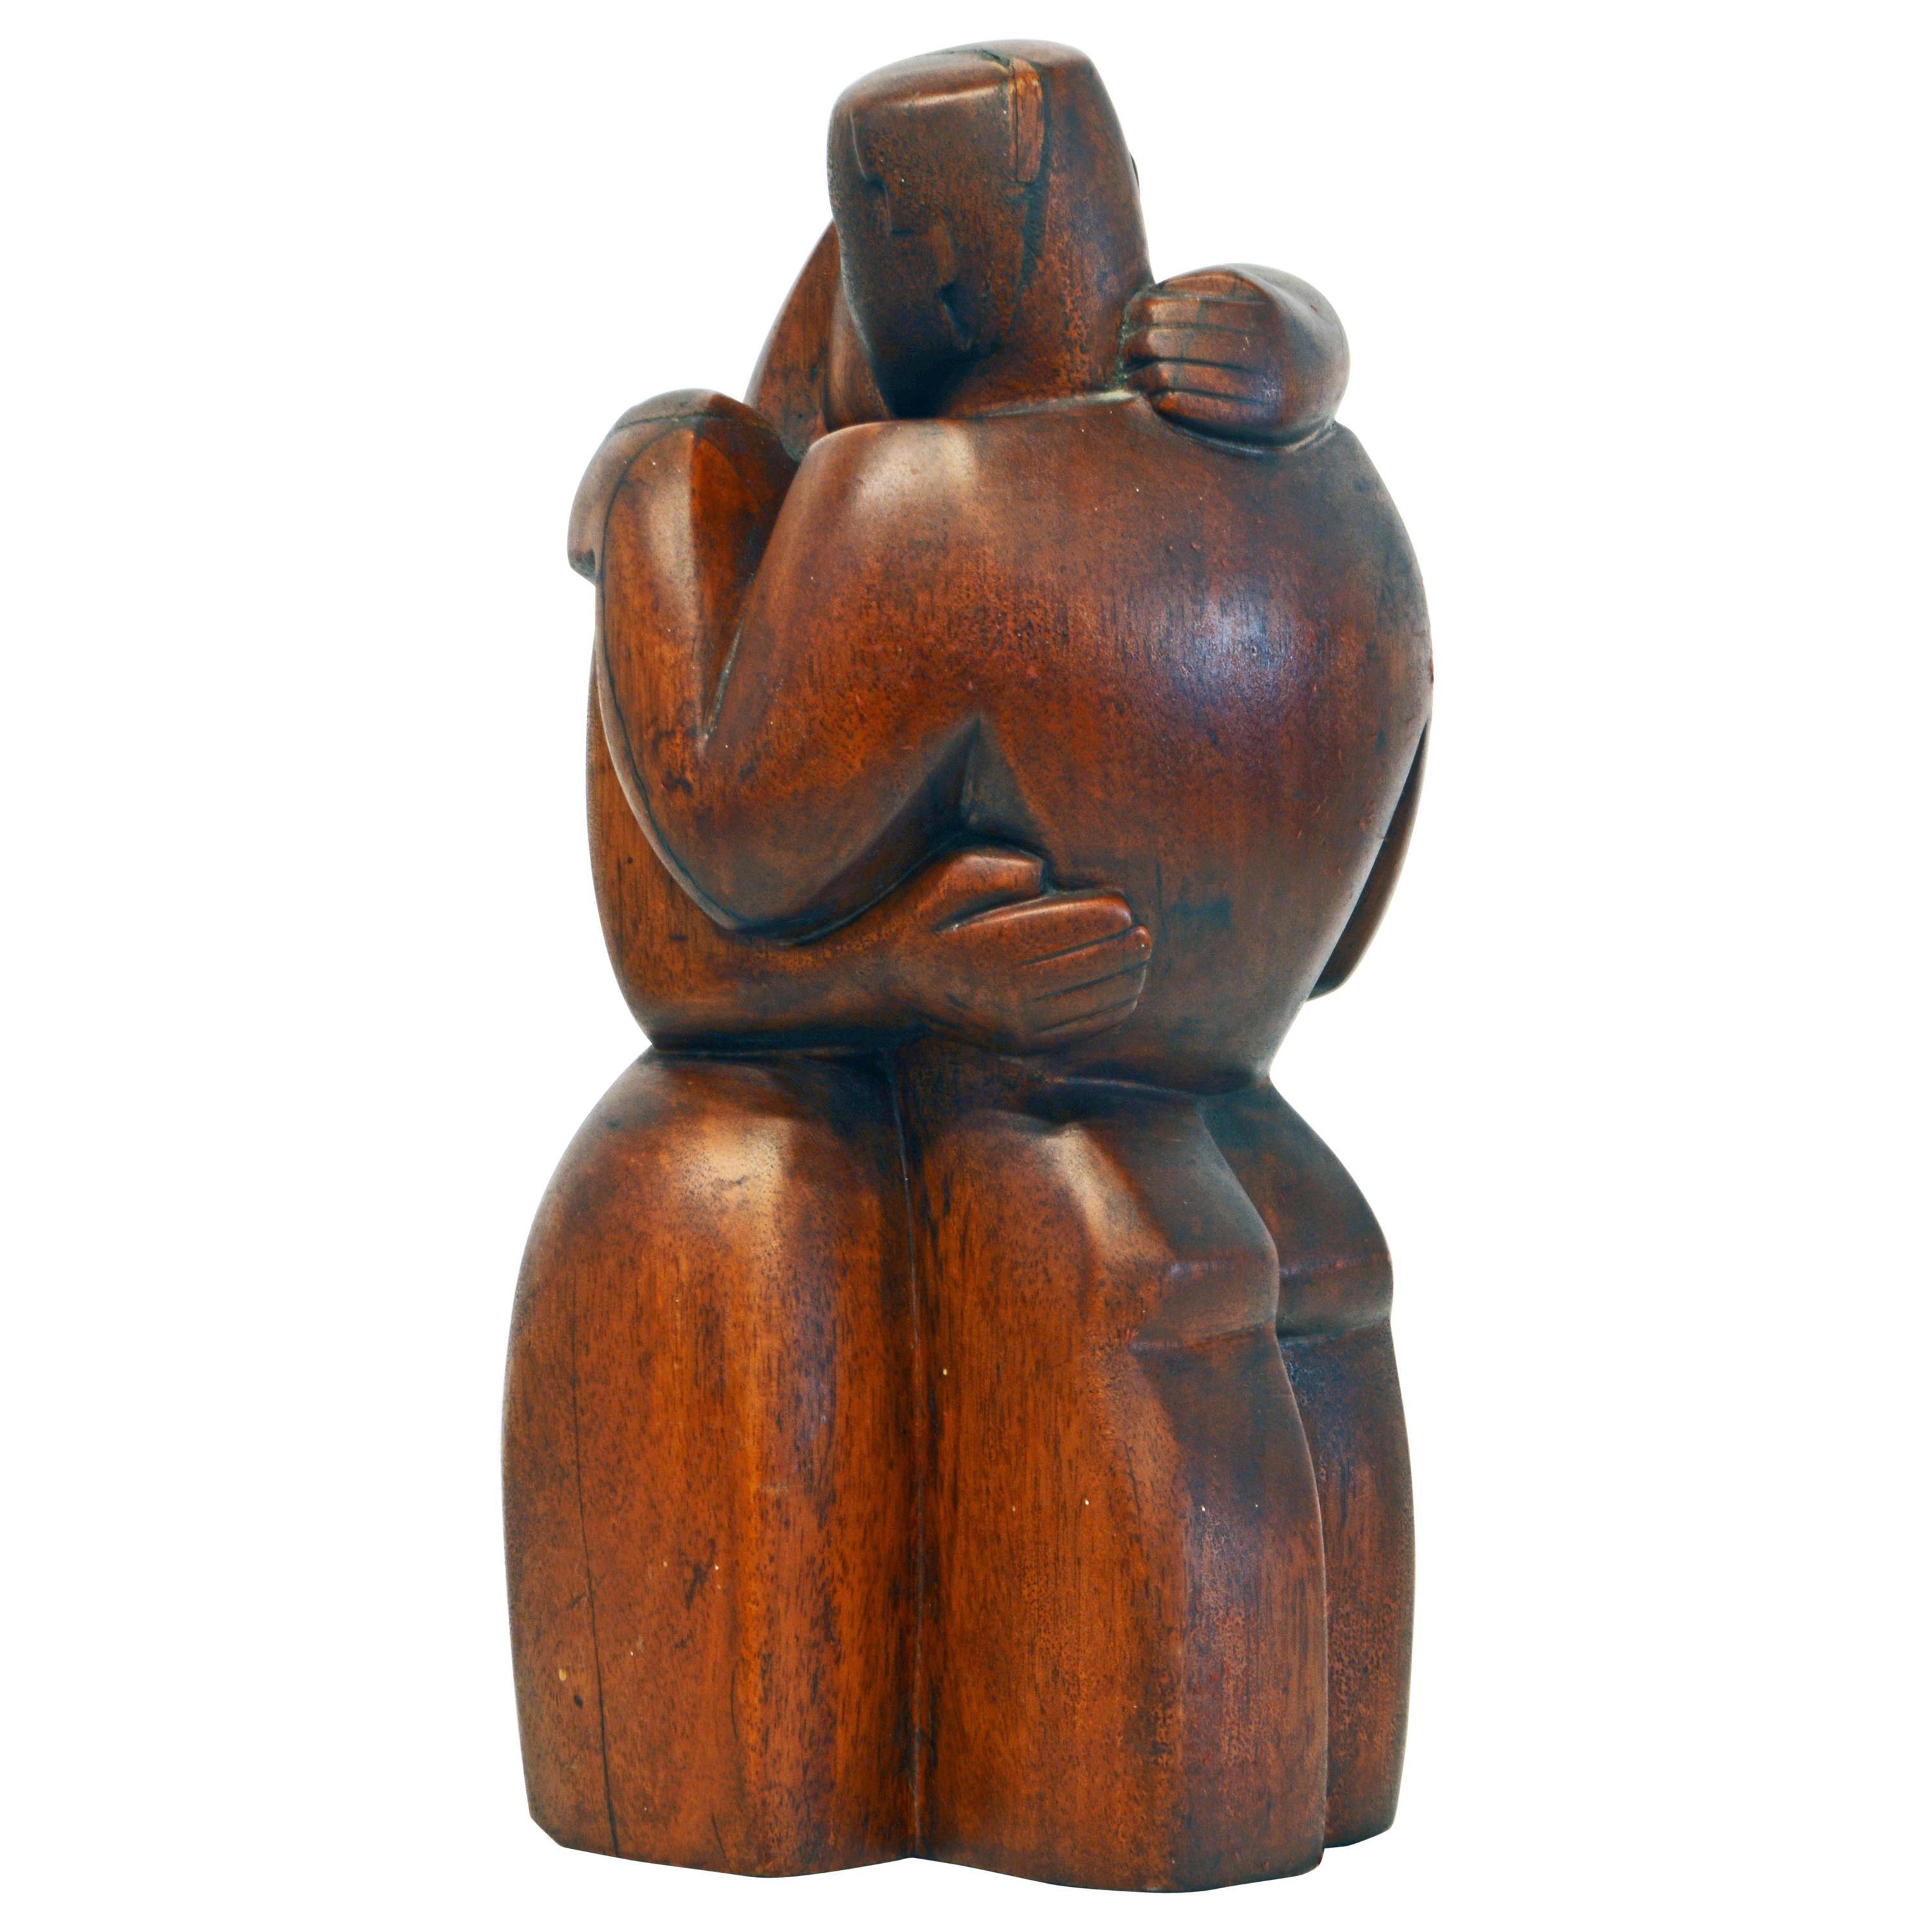 Carved Cubist Style Mahogany Sculpture 'Farewell' by Clara Shainess, 1896-1987